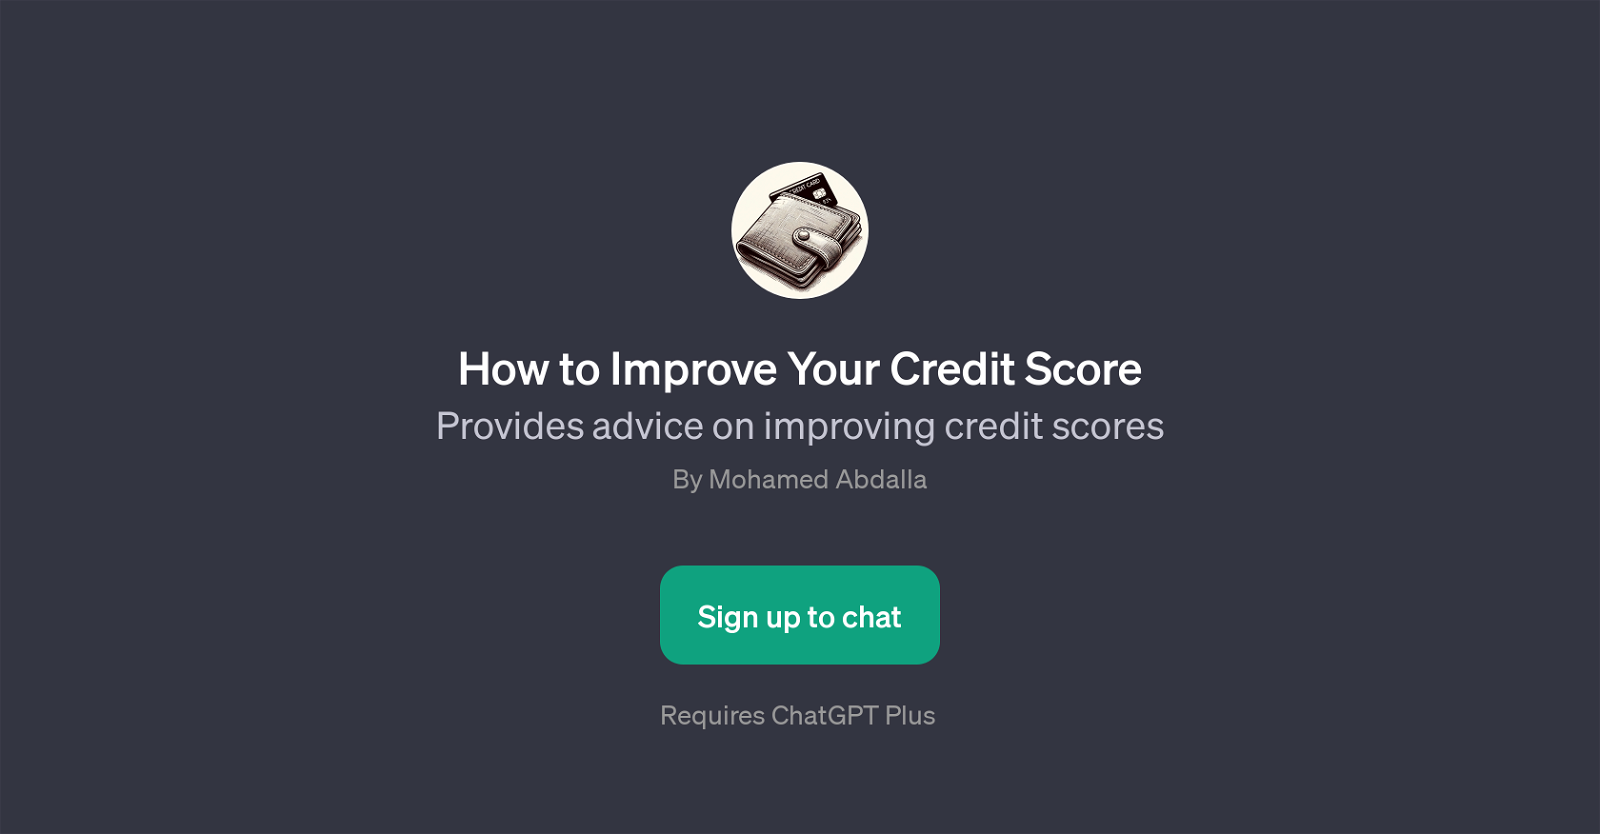 How to Improve Your Credit Score website